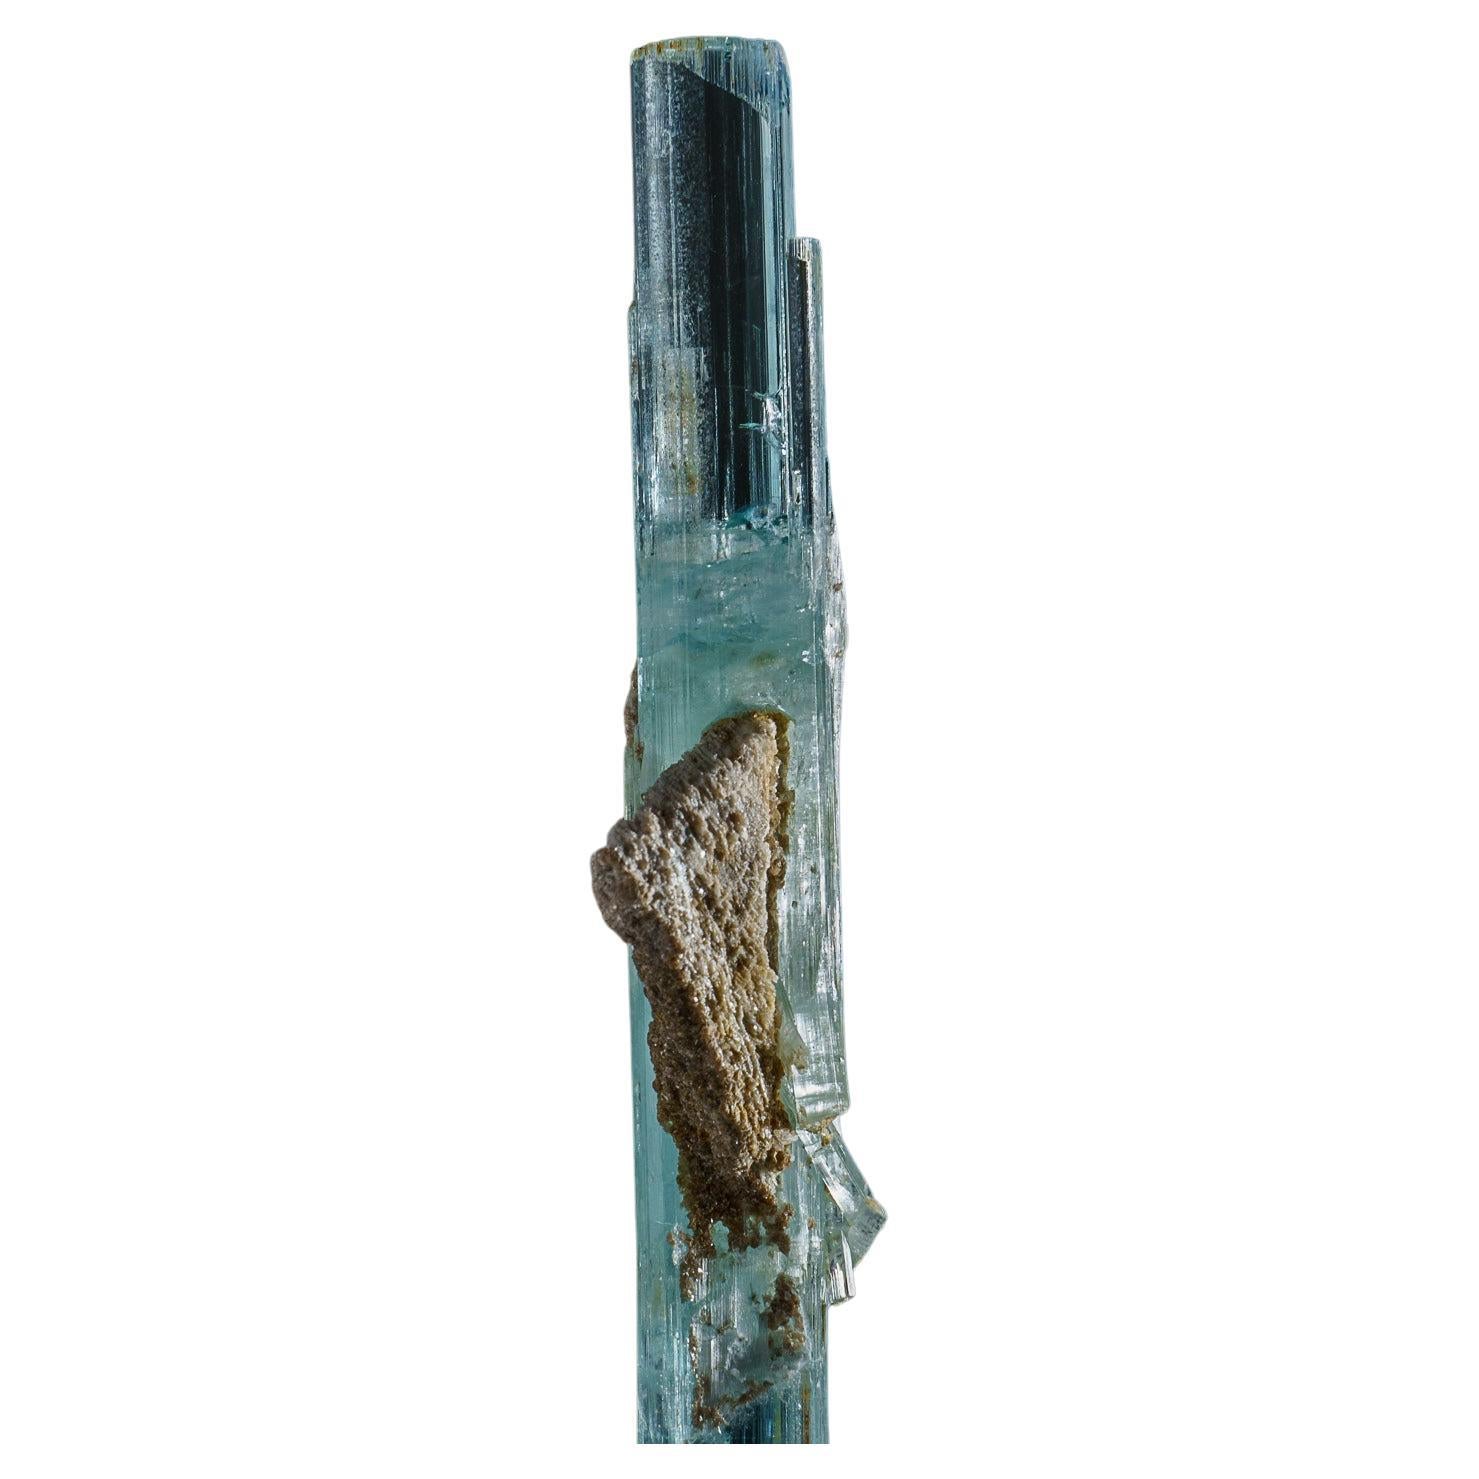 From Shigar Valley, Shigar District, Gilgit-Baltistan, Pakistan

Lustrous translucent to transparent gemmy crystals of aquamarine beryl with muscovite crystals around. The aquamarine crystal is highly transparent with glassy crystal faces.